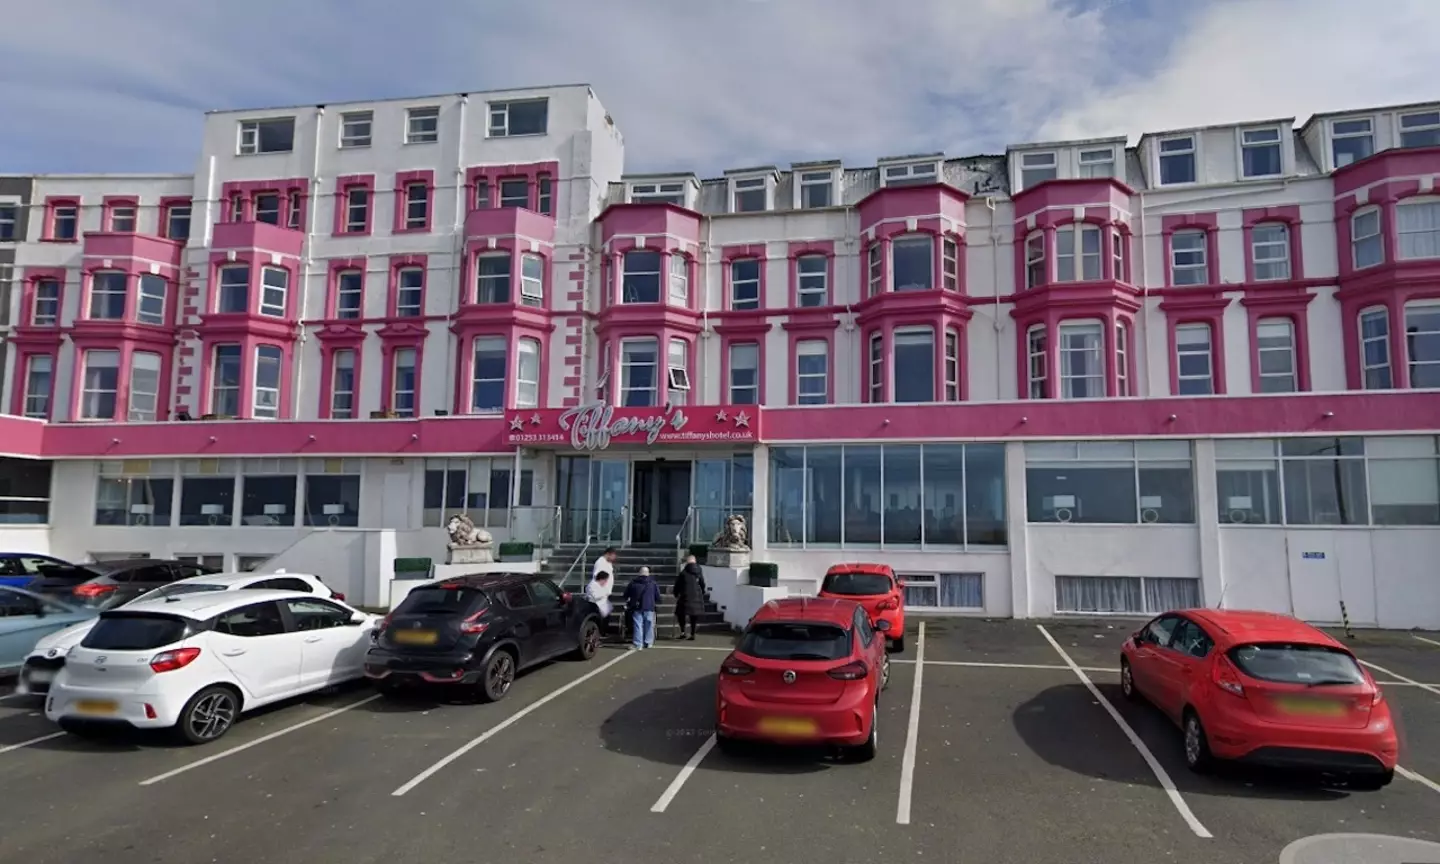 A 10-year-old boy has died after suffering an electric shock at a hotel in Blackpool.